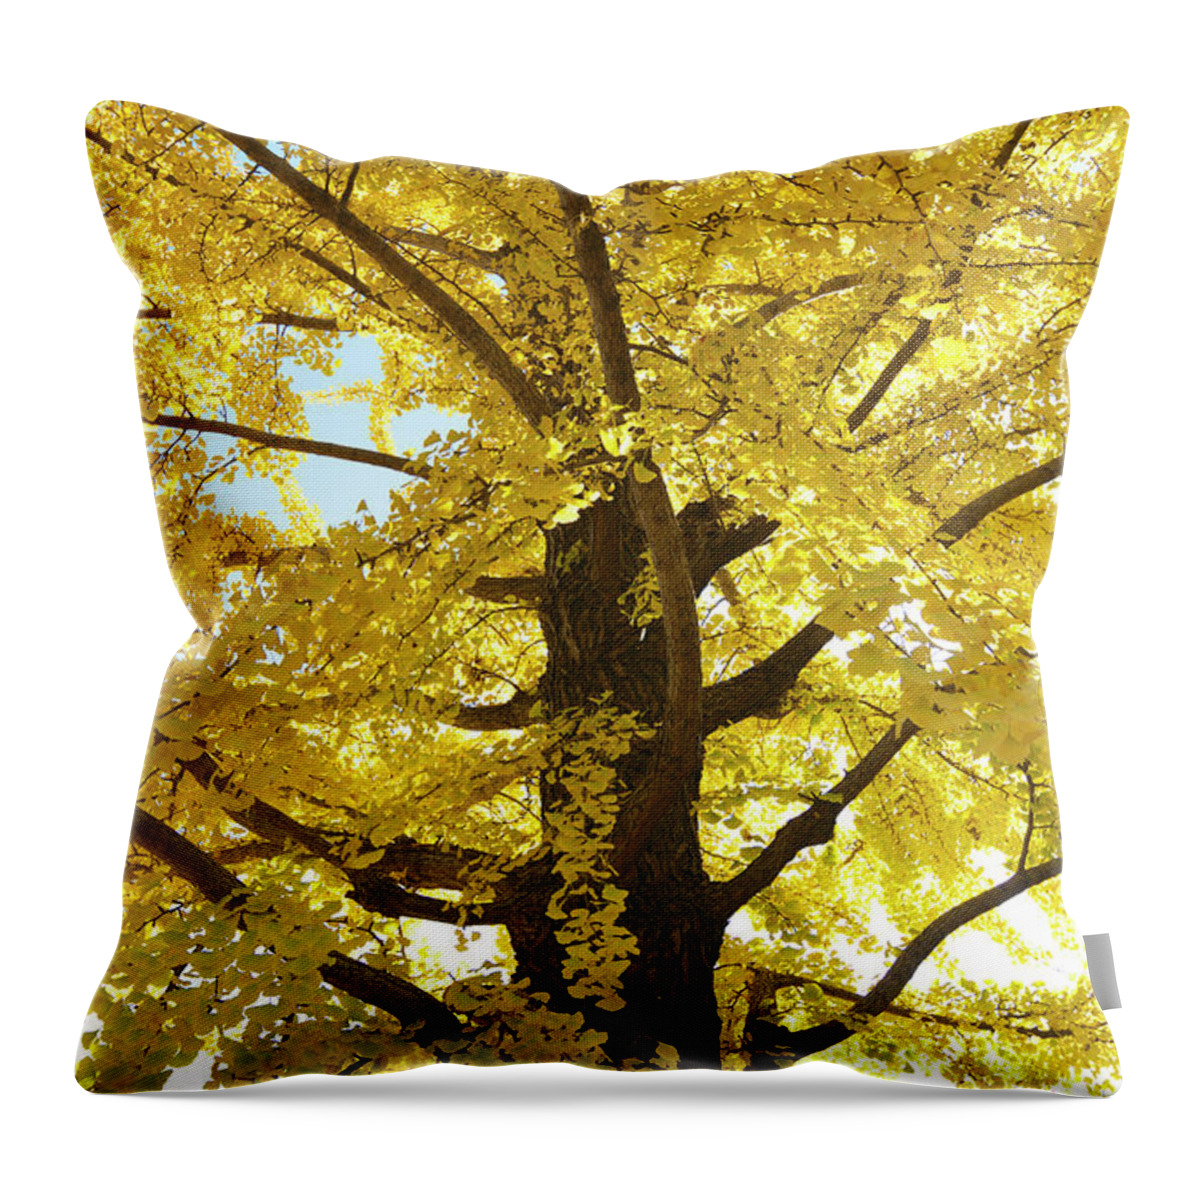 Ginkgo Tree Throw Pillow featuring the photograph Gingko Tree In Autumn, Tokyo by Wada Tetsuo/a.collectionrf